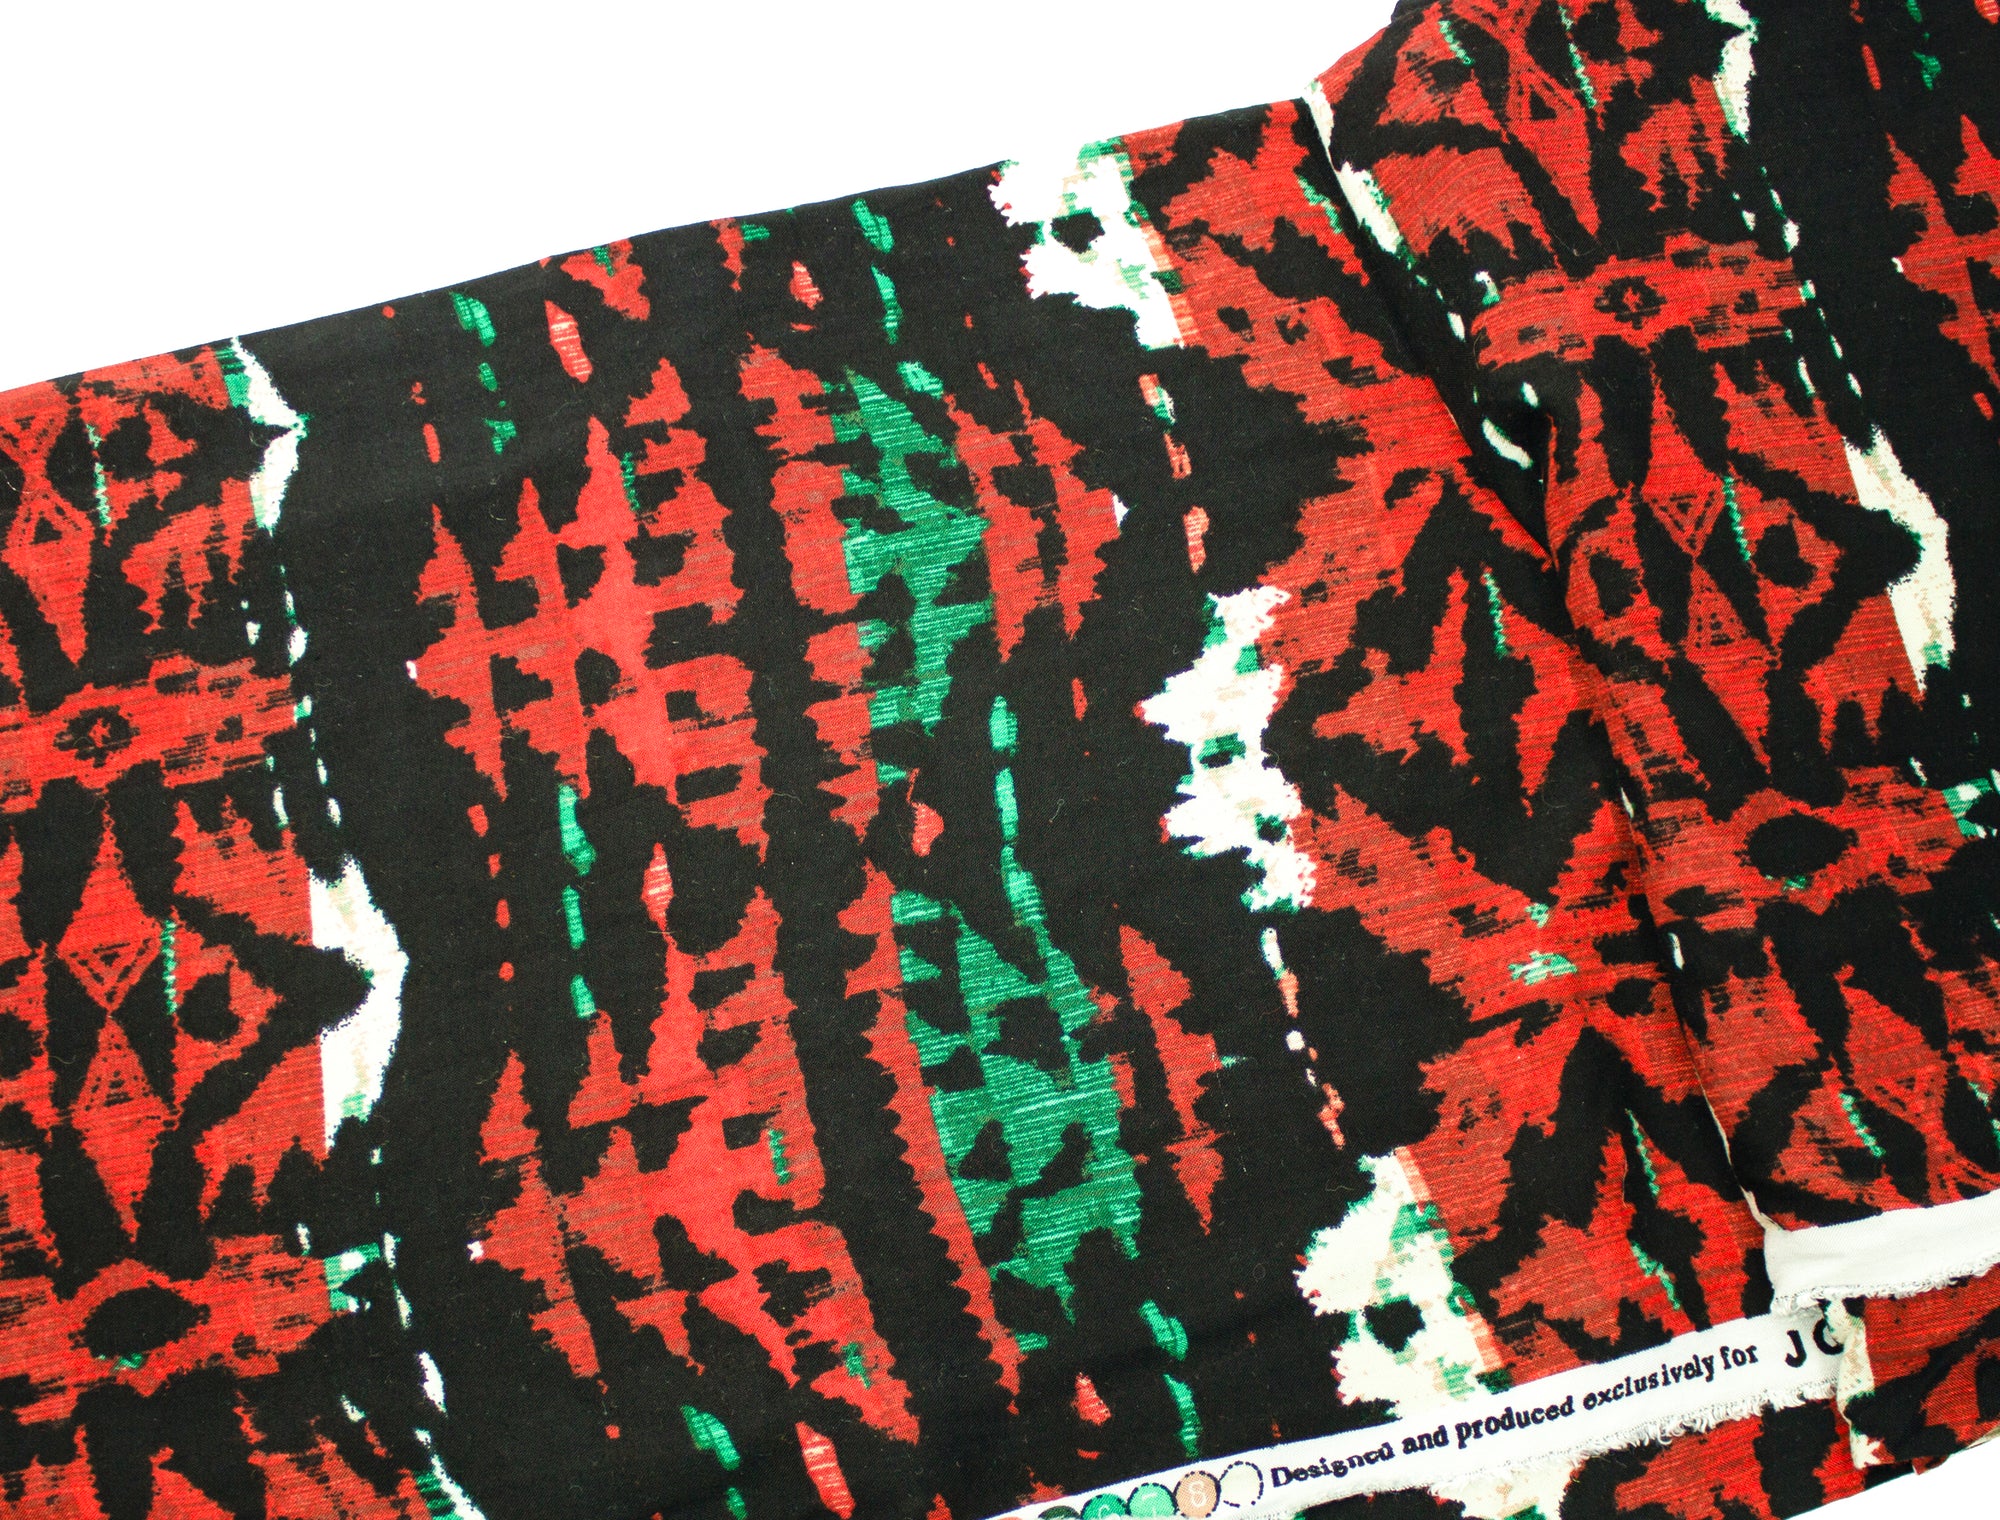 Vintage Fabric Black and Red Geometric Print - Measures 2 Yards 30" x 54"